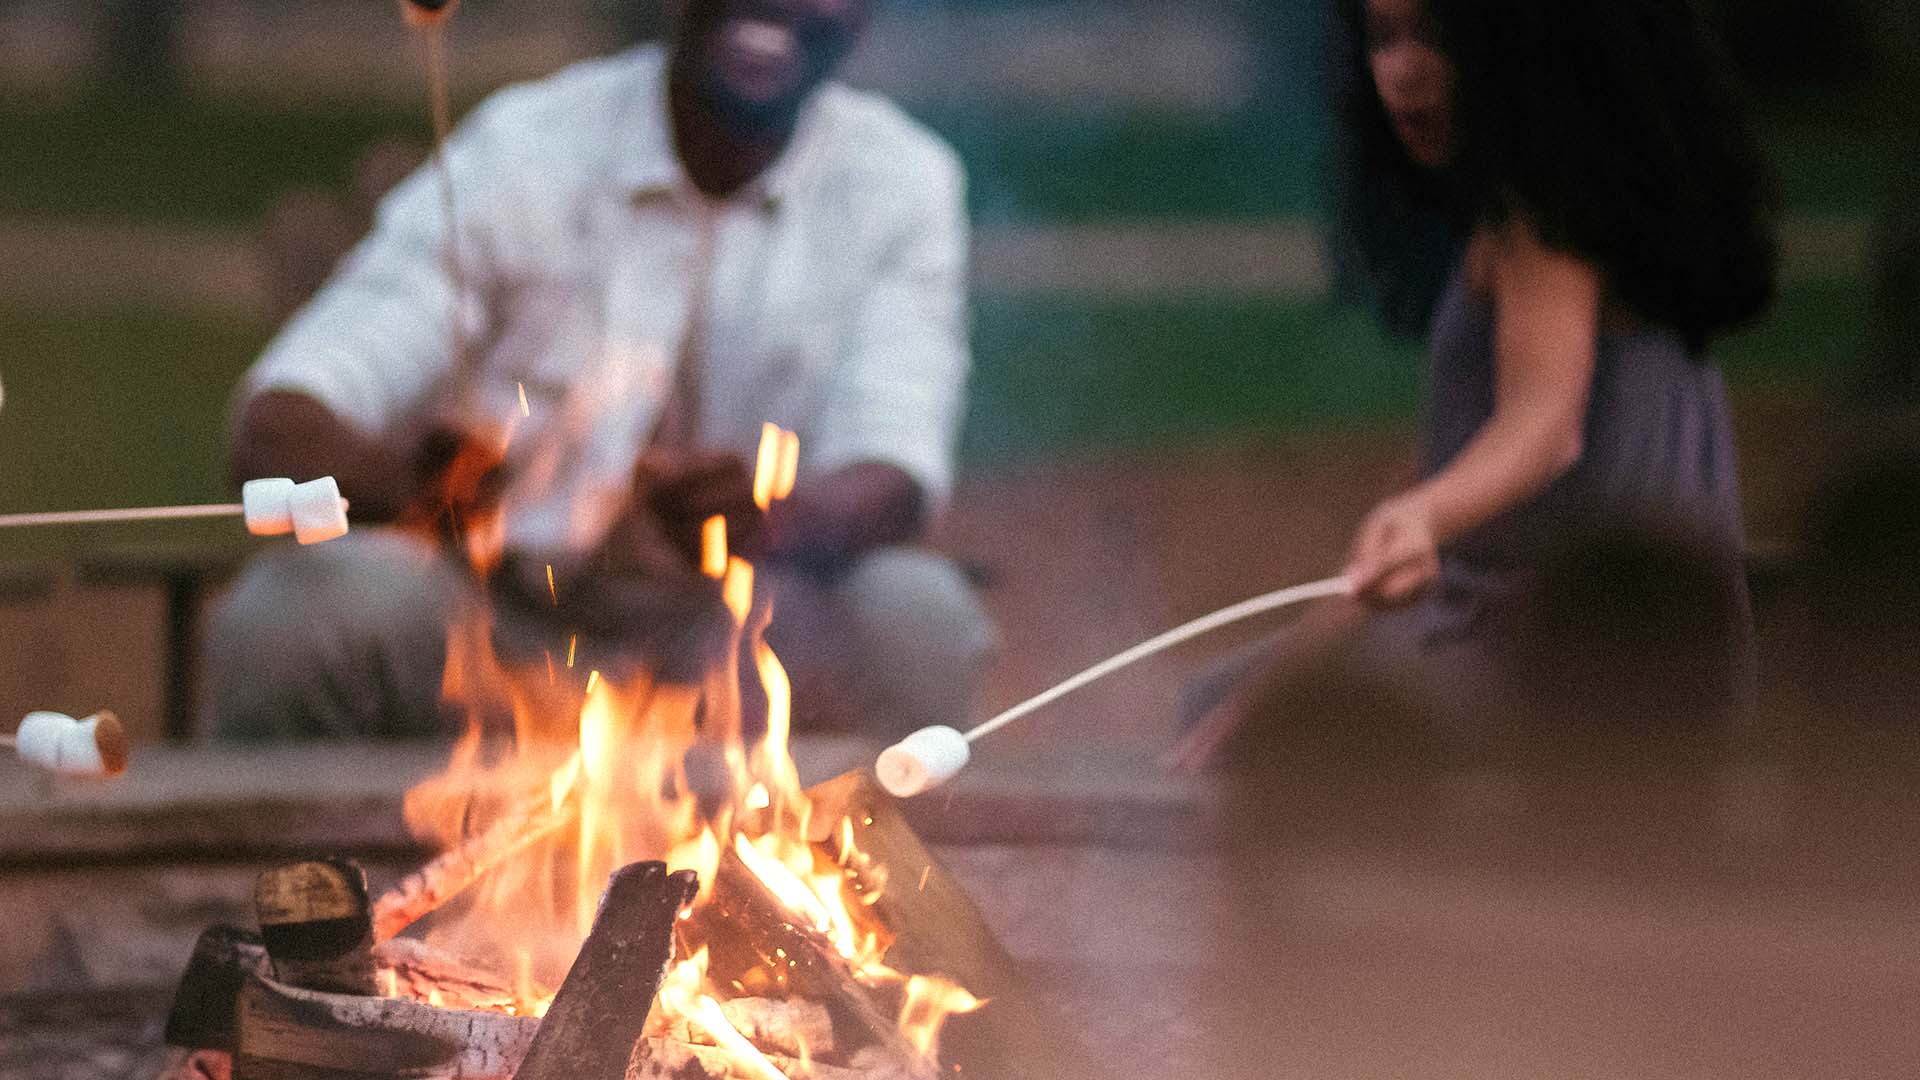 s'mores being roasted over a fire pit, with two people in the background